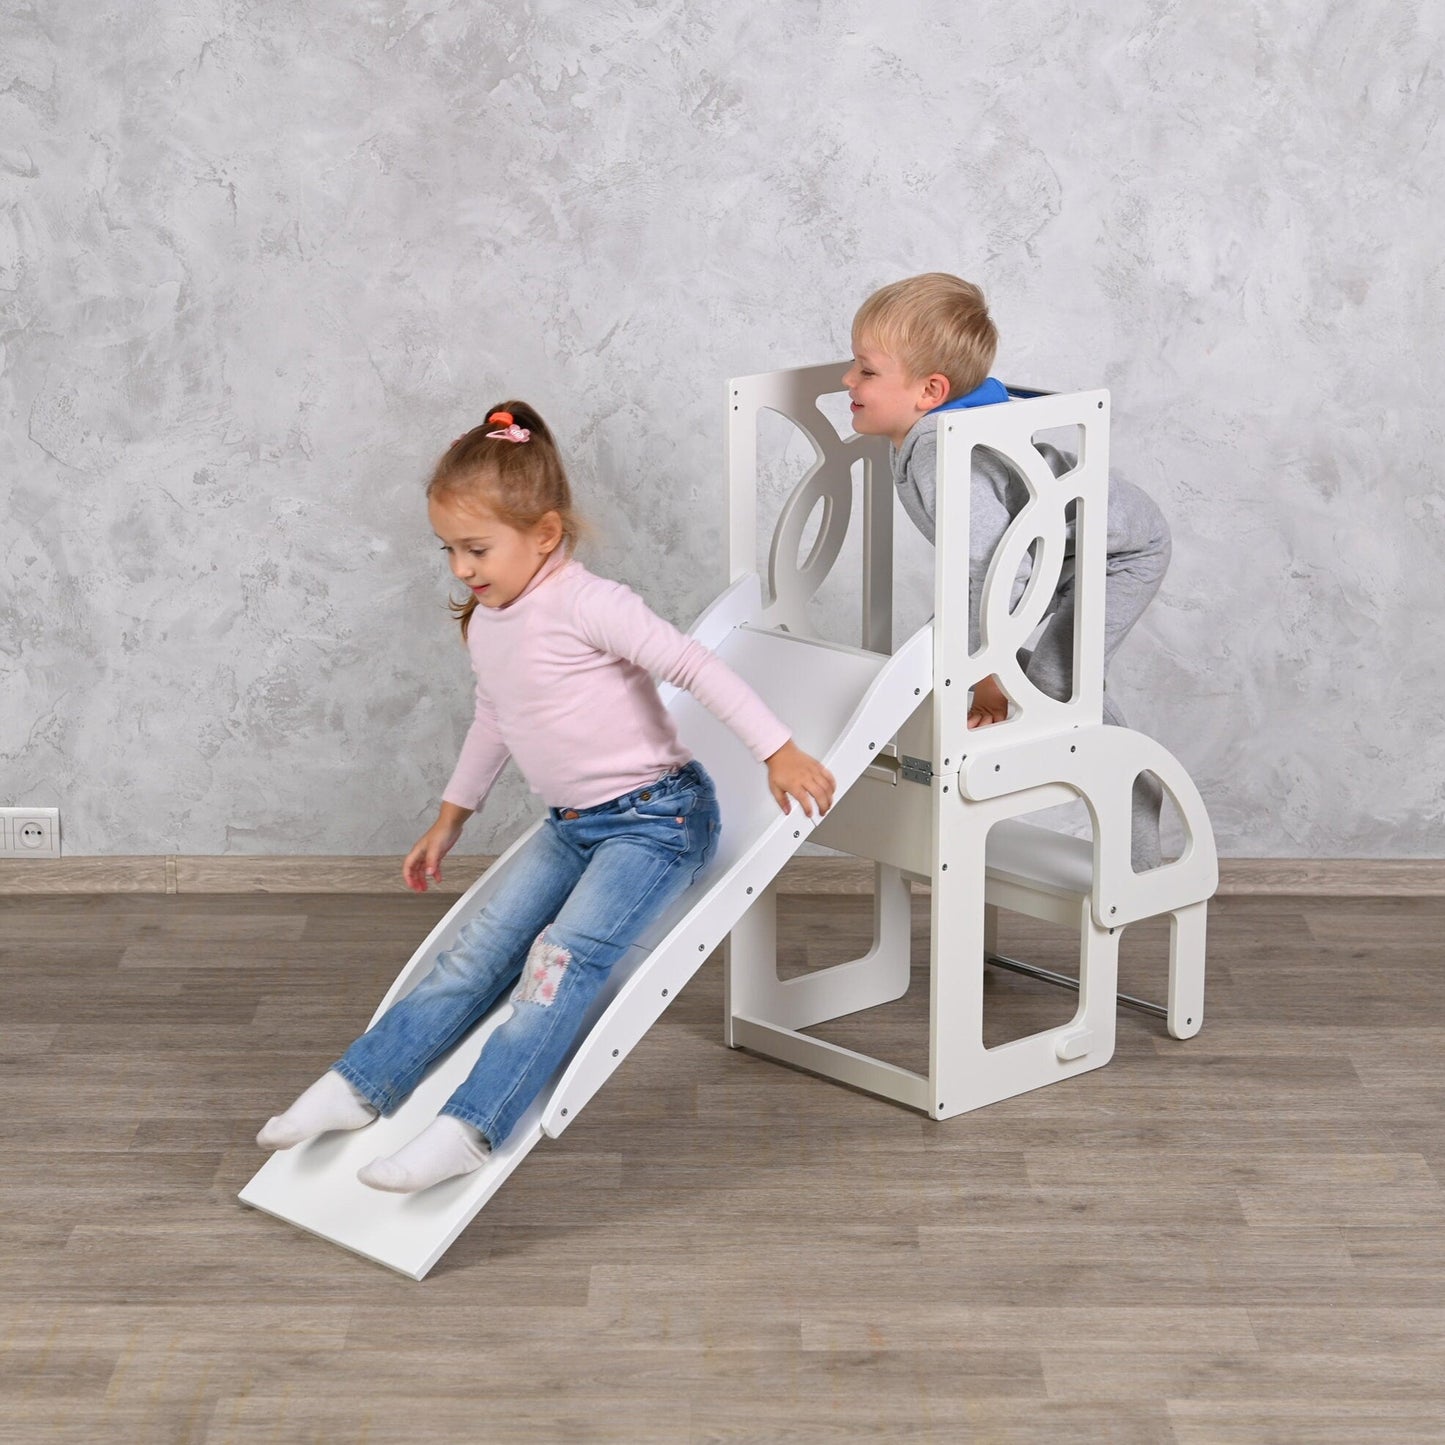 Convertible learning helper tower & table, montessori kitchen step stool